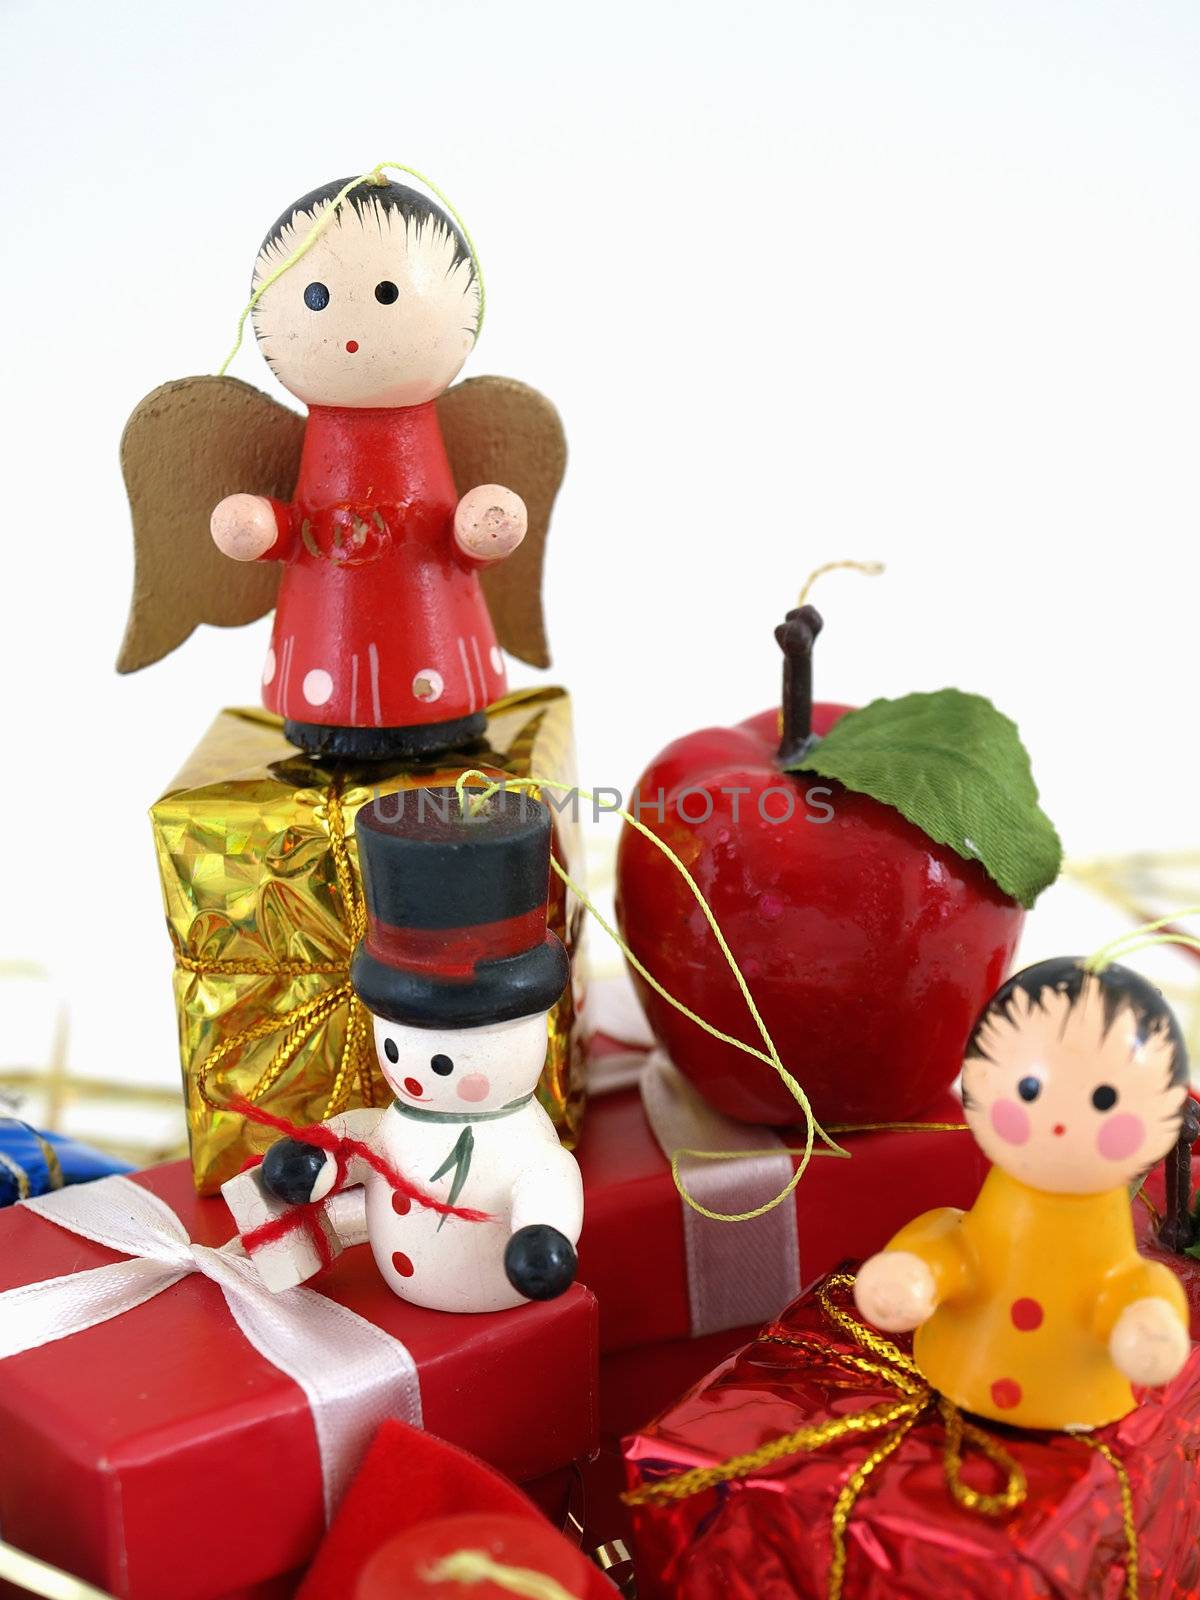 Cute Wood Ornaments by RGebbiePhoto